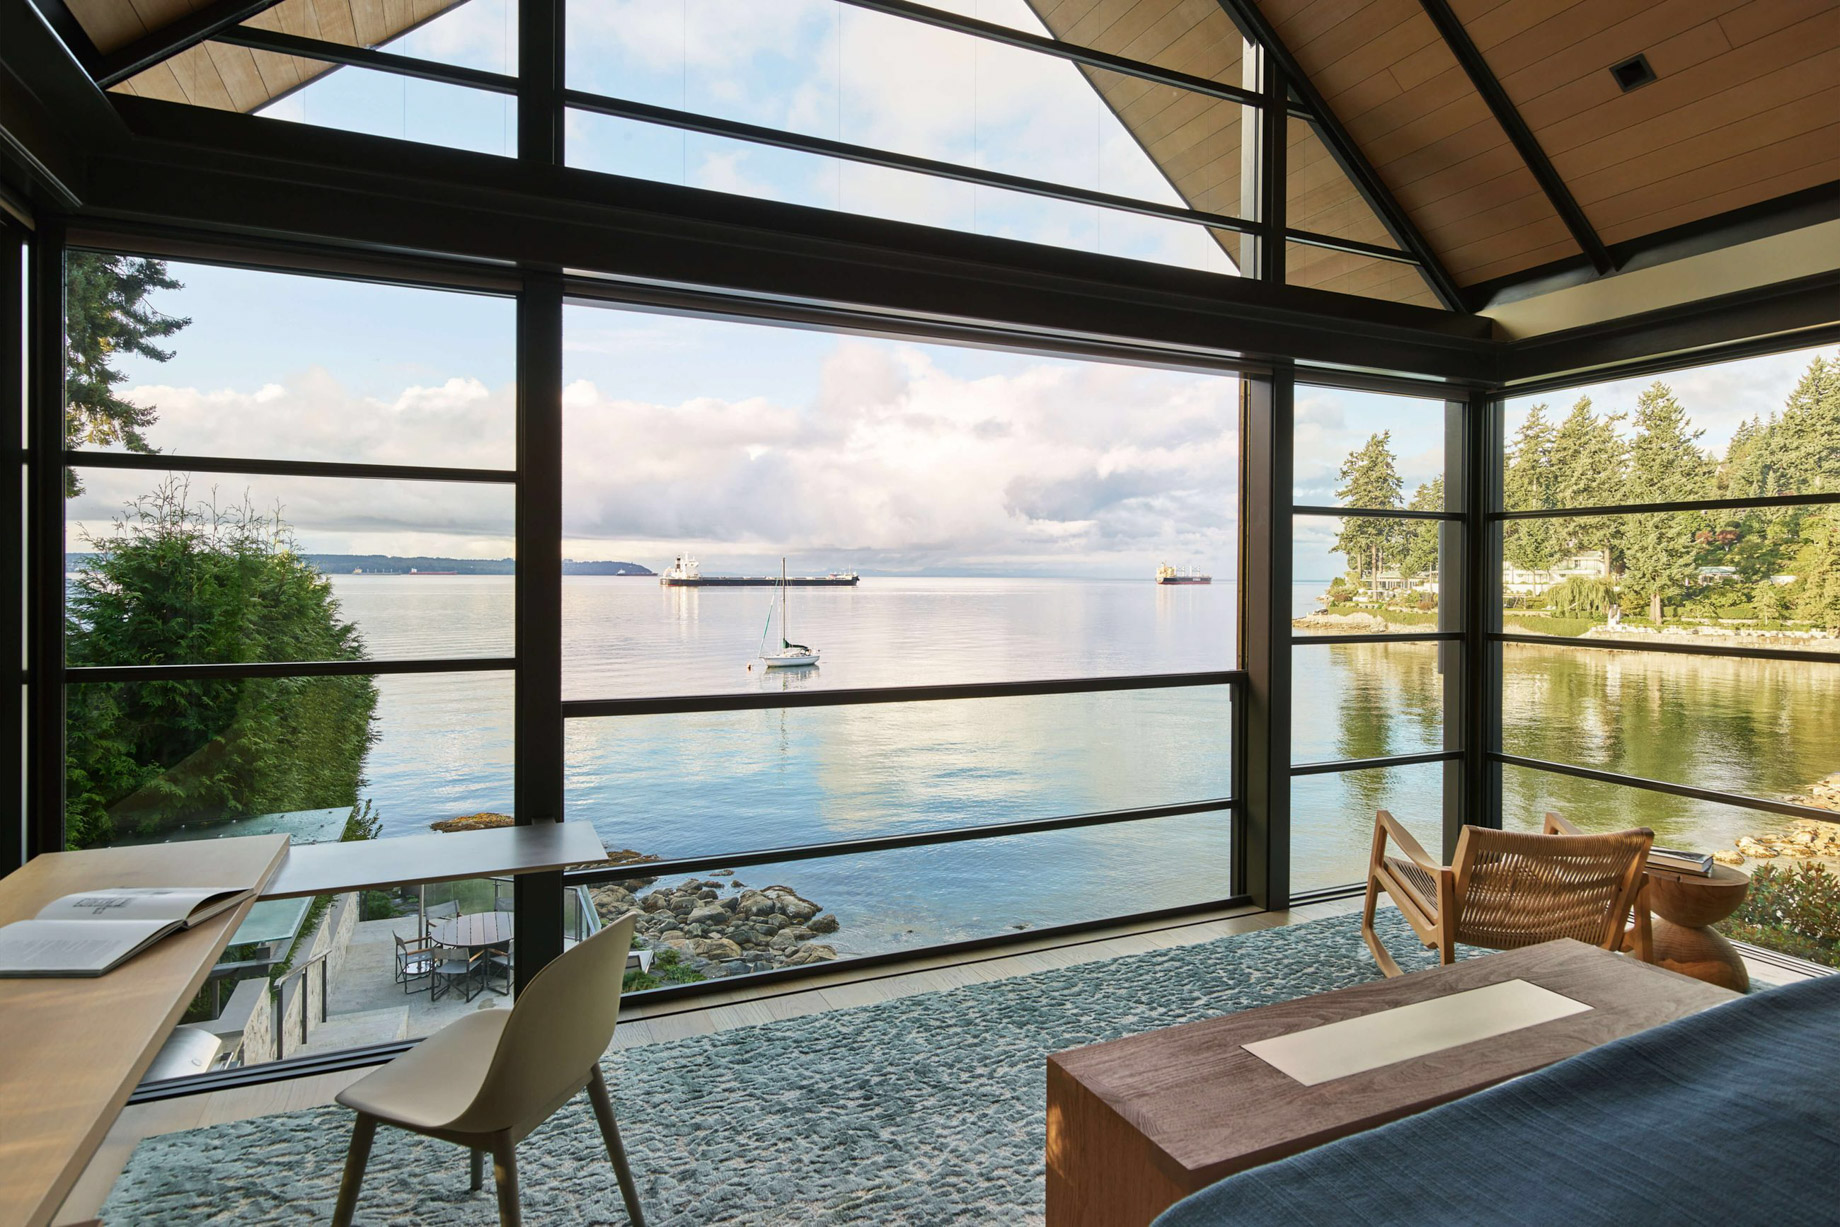 Sea House Residence - Radcliffe Ave, West Vancouver, BC, Canada